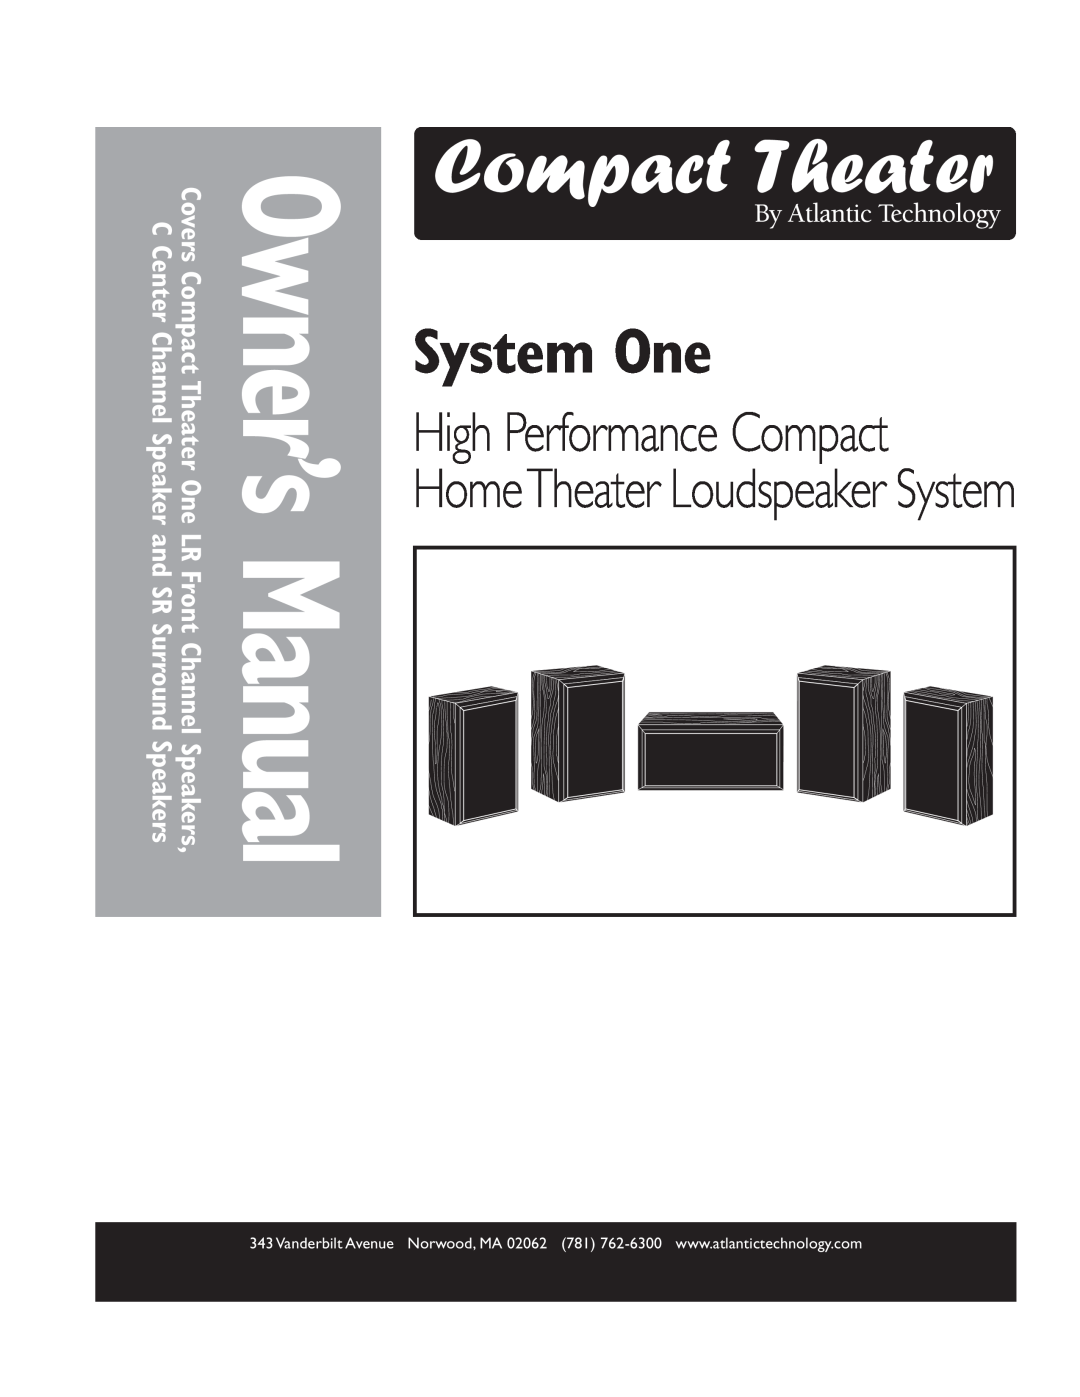 Atlantic Technology High Performance Compact owner manual System One, Speakers, and SR Surround, C Center Channel Speaker 